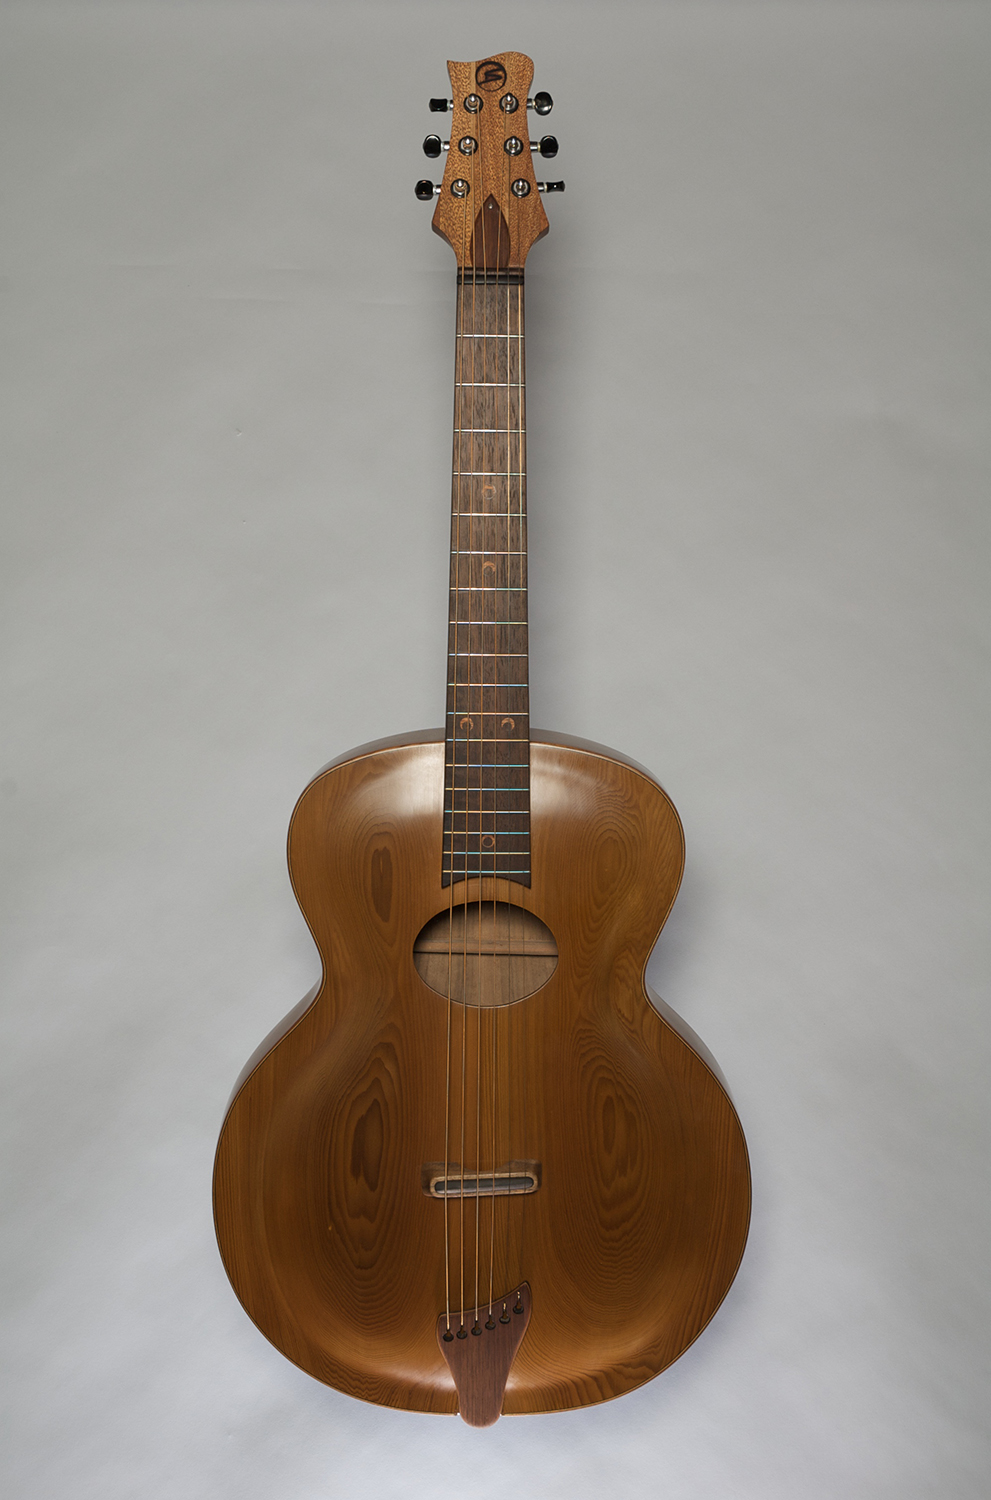 Handcarved Archtop